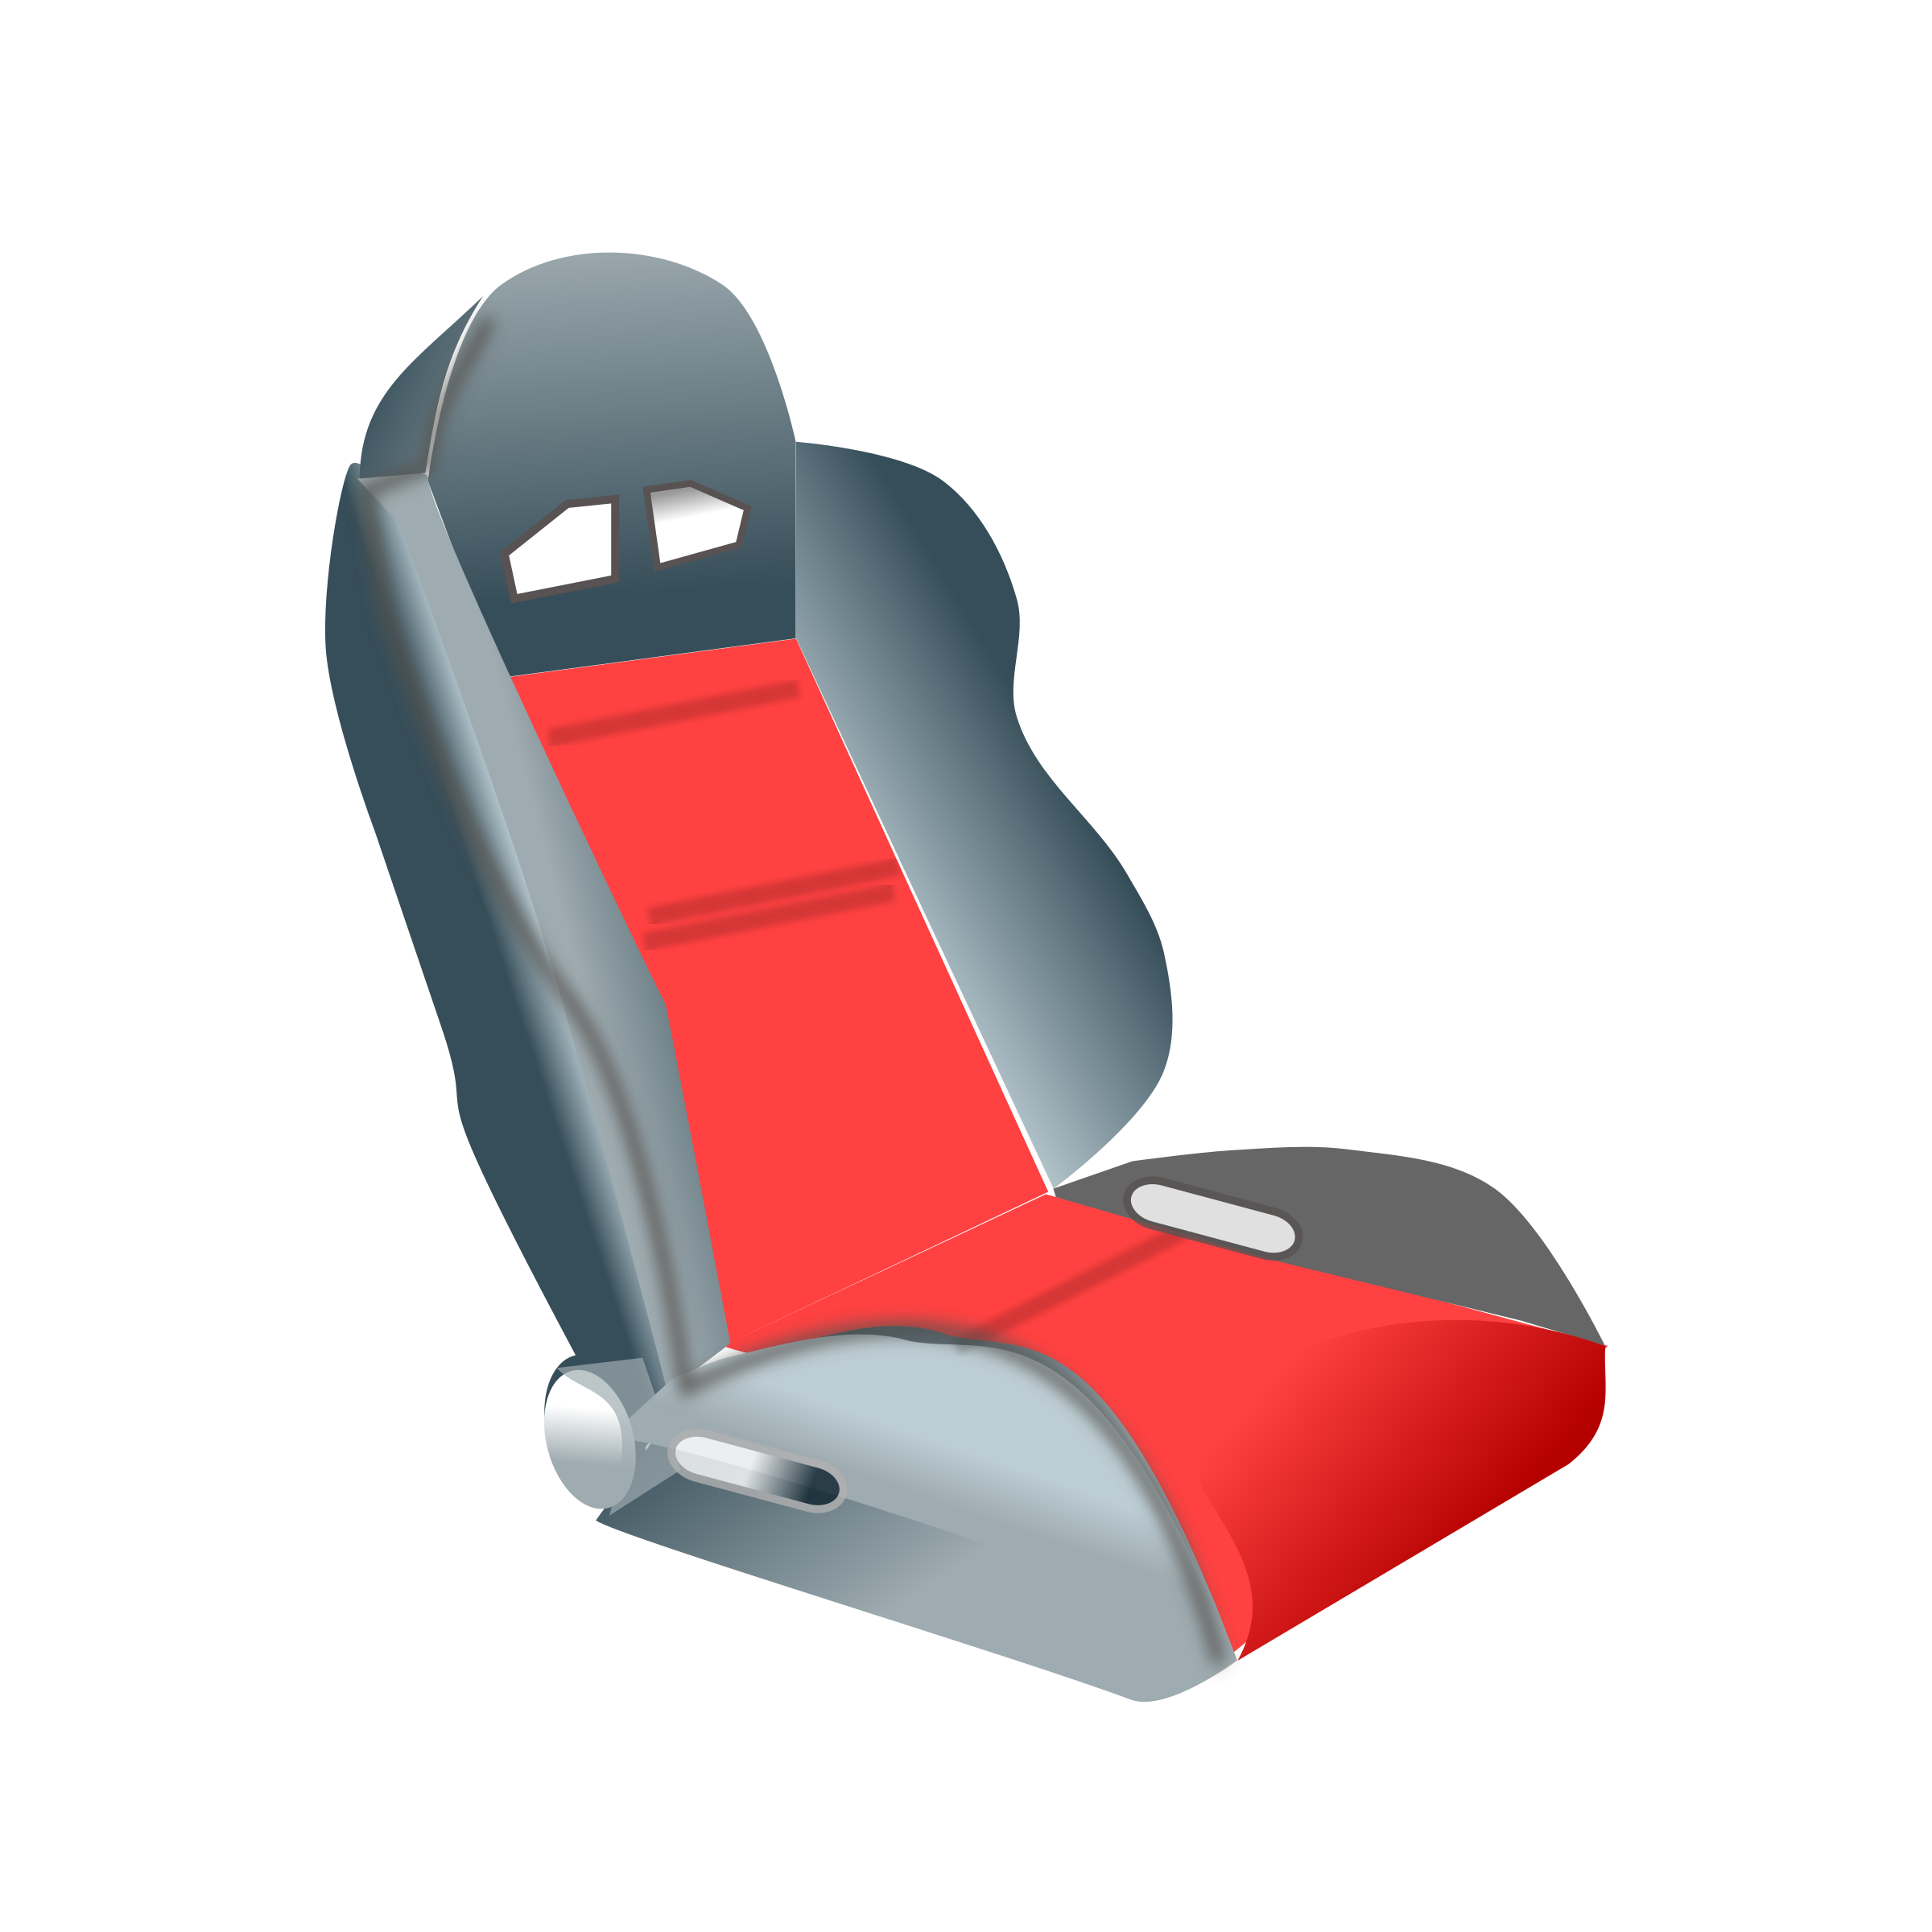 Clipart chair seat. Racing big image png